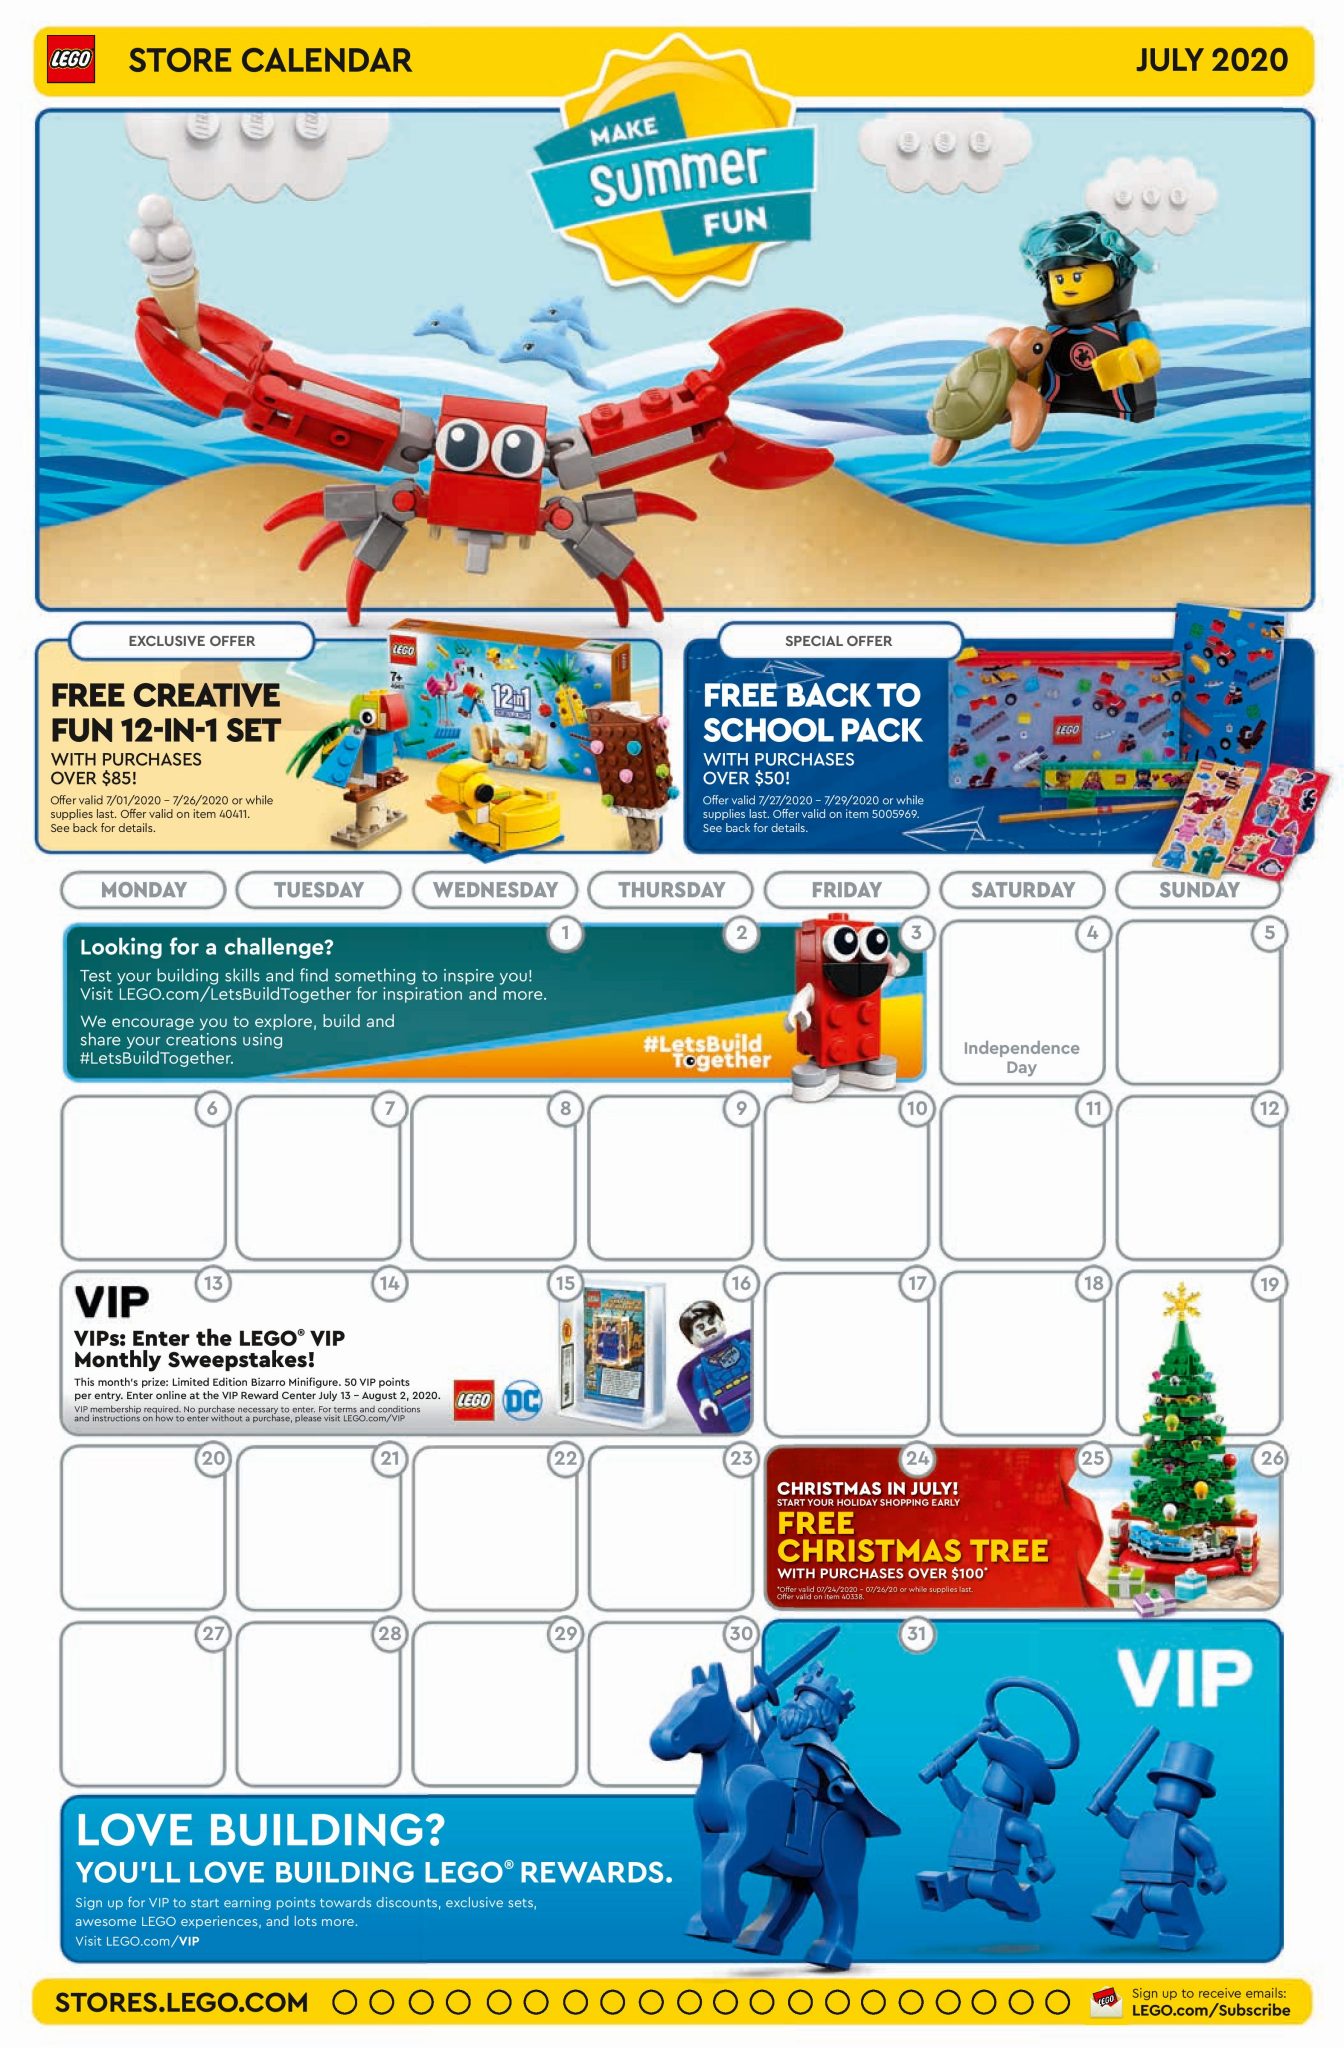 LEGO July 2020 Store Calendar Promotions & Events - The Brick Fan